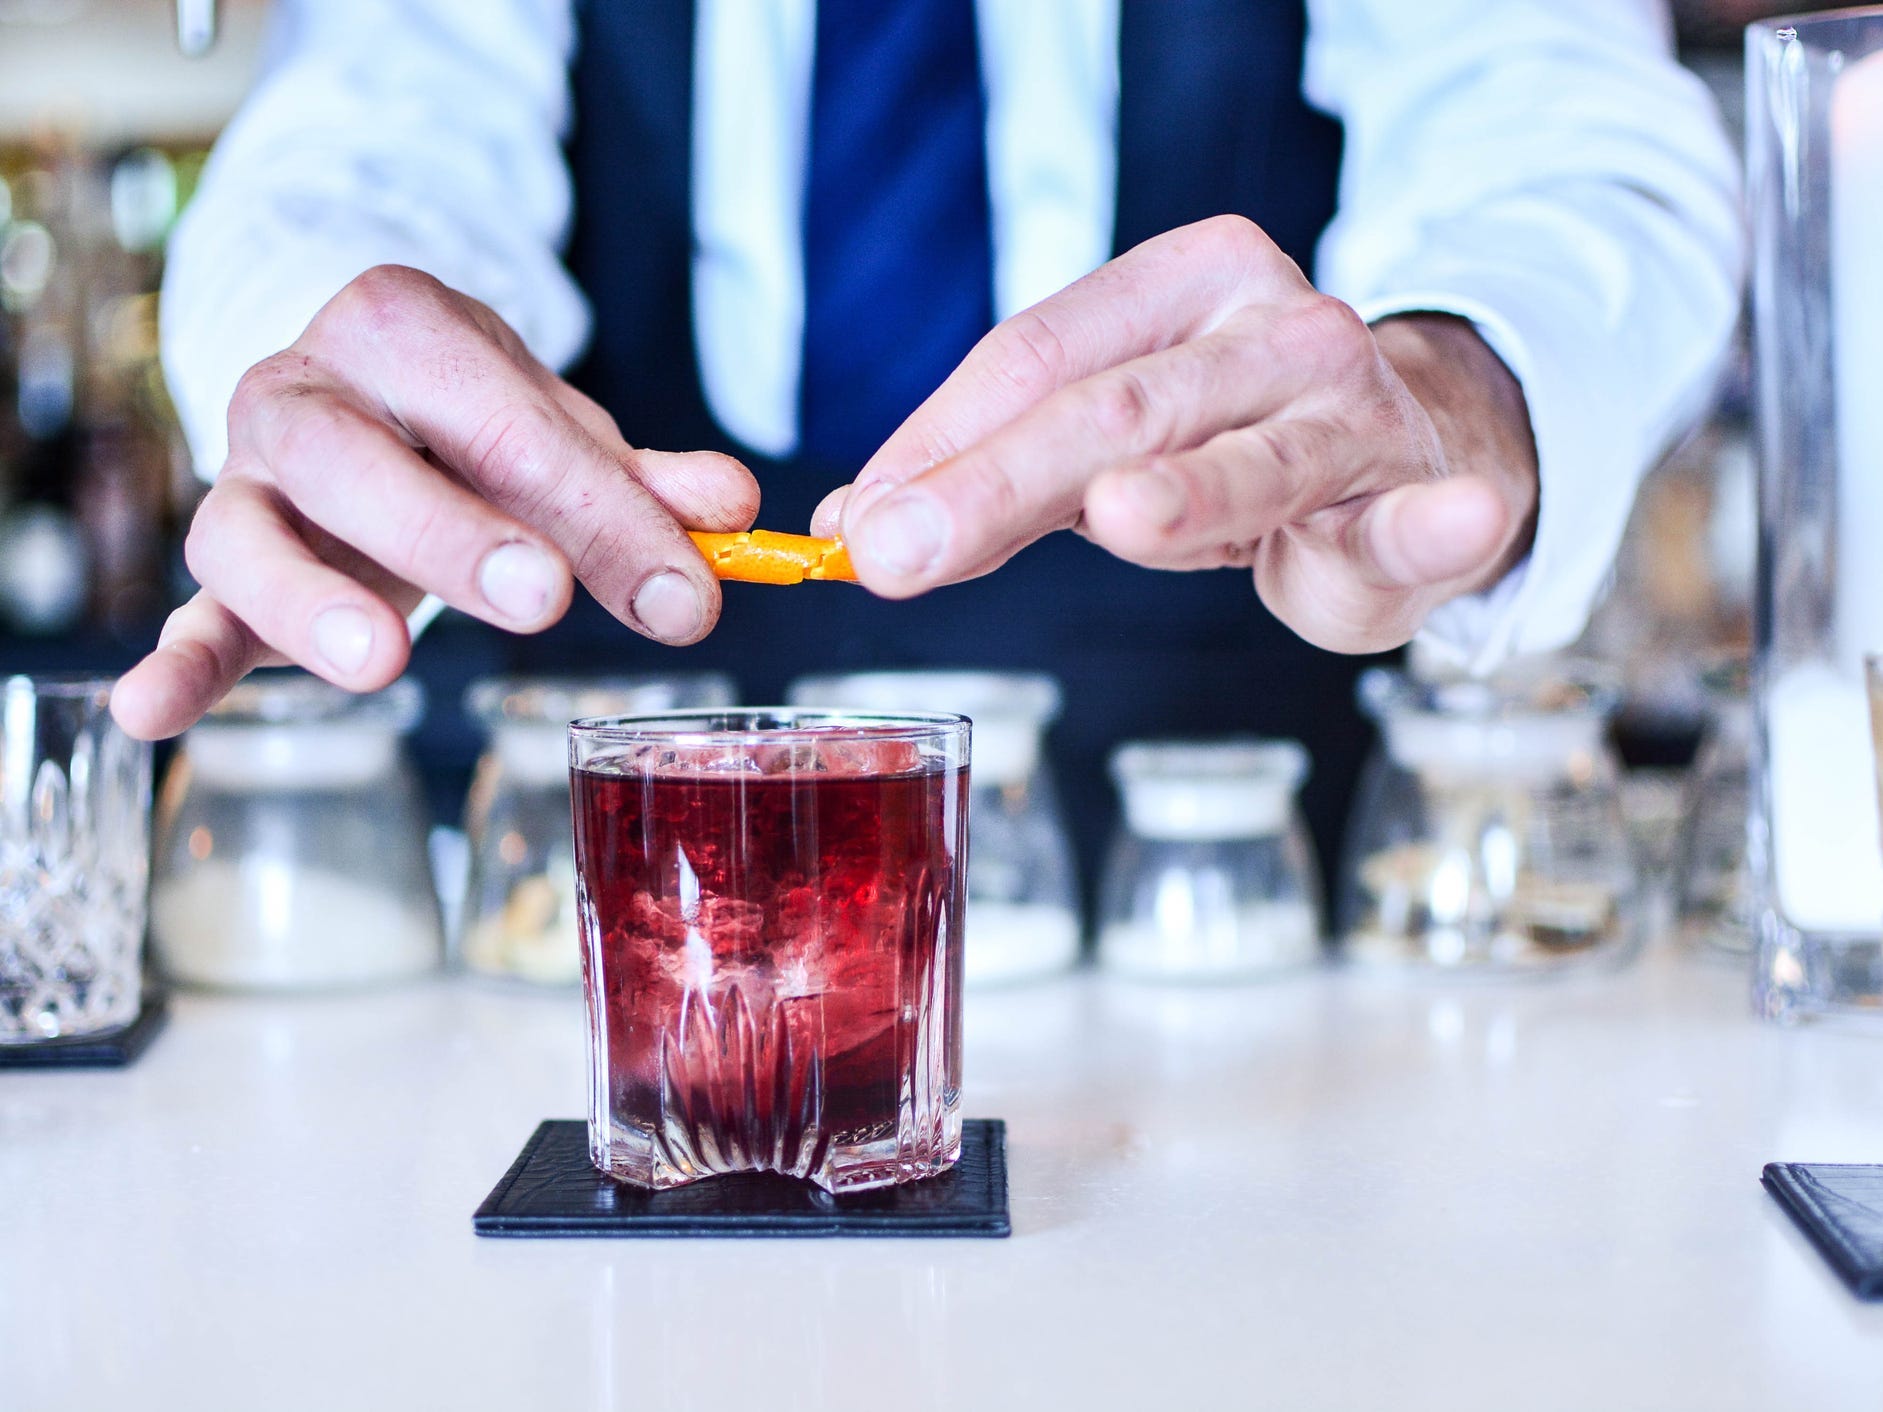 A bartender making a Negroni cocktail with an orange peel garnish.